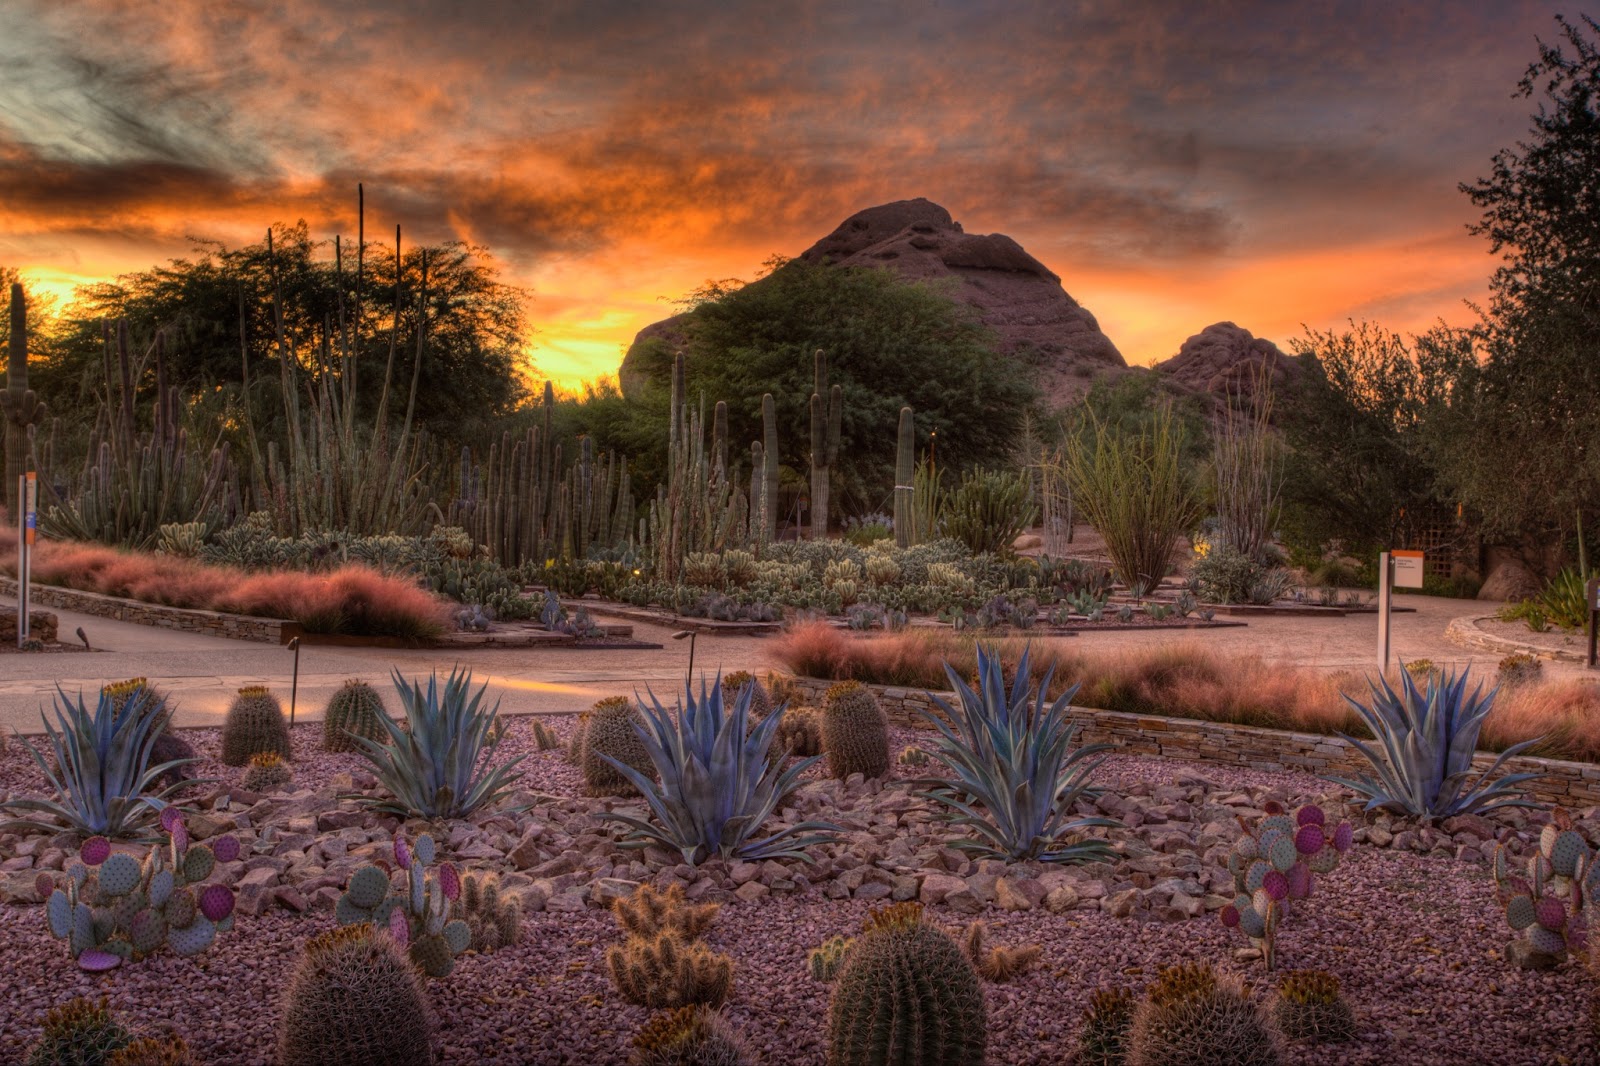 15 Fascinating Facts About Phoenix You Probably Didn't Know